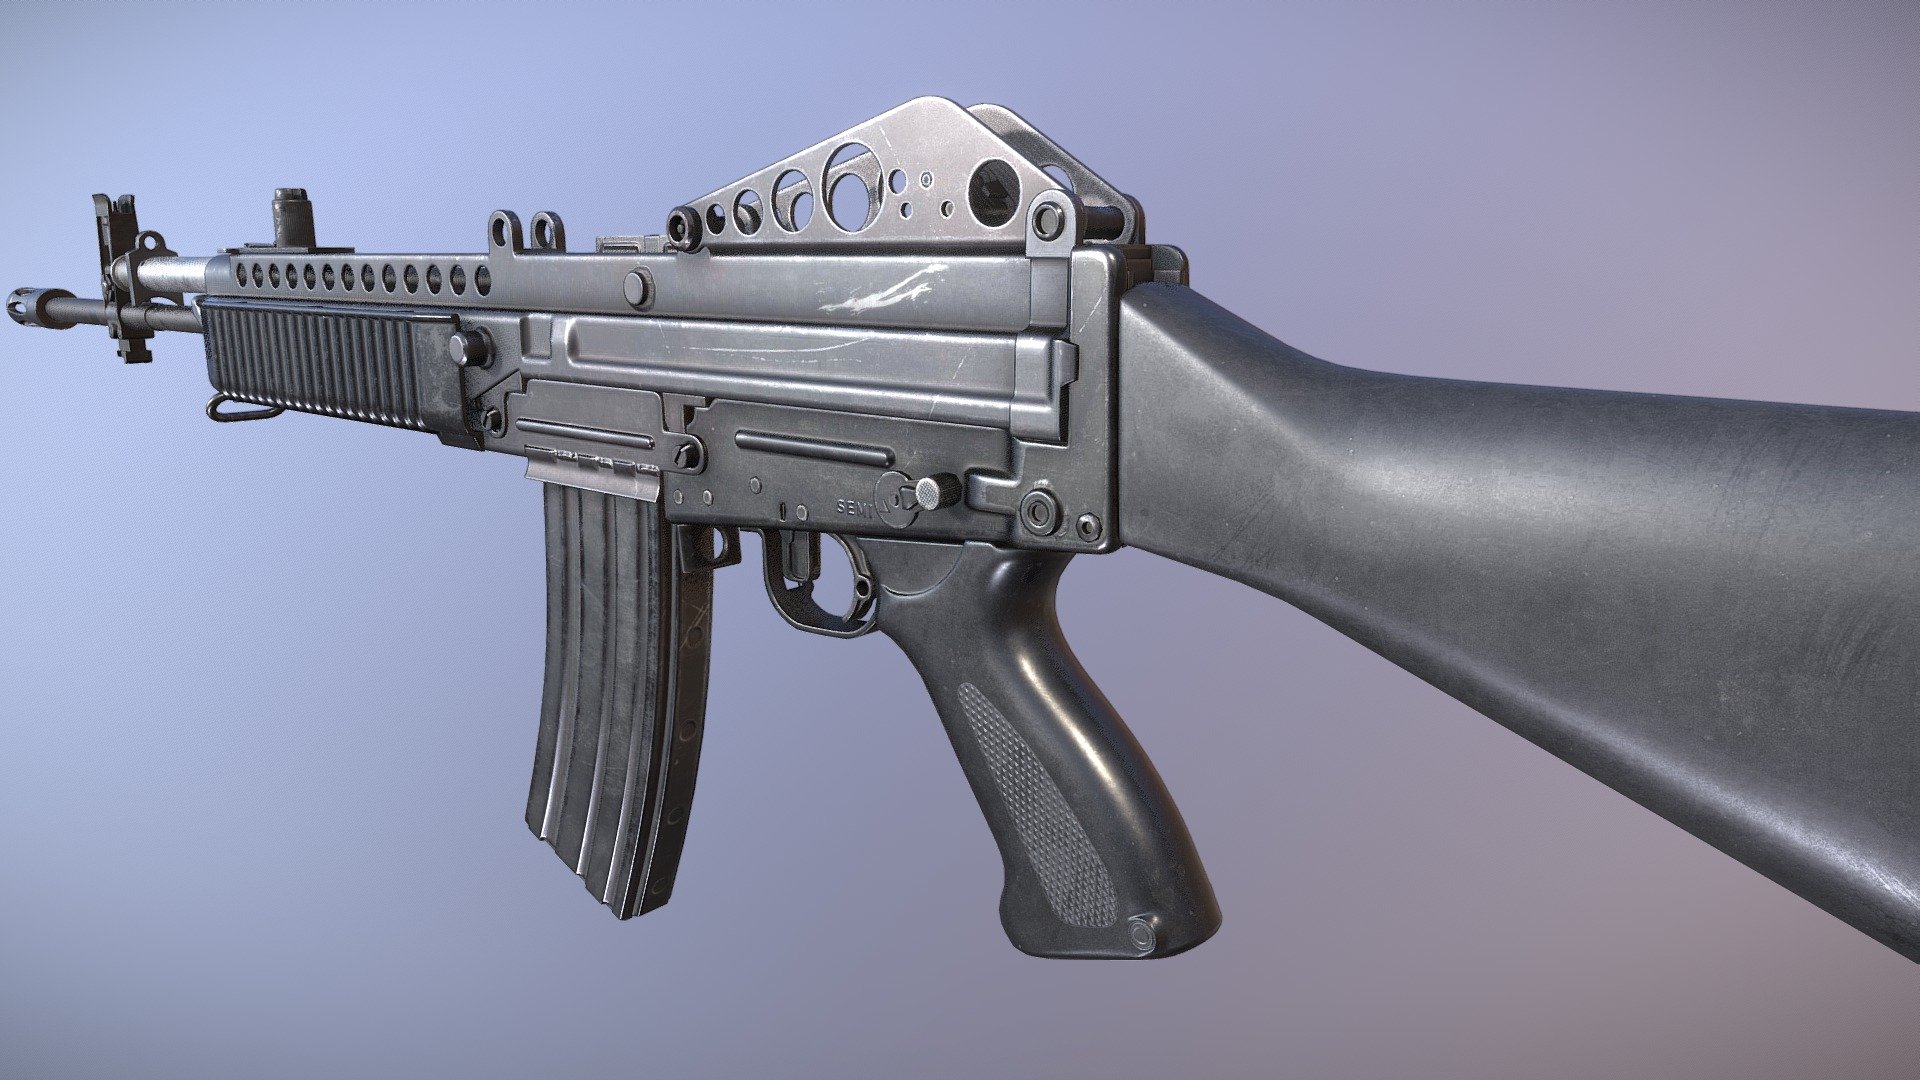 Stoner 63A Rifle designed for PBR engines.

Originally modeled in 3ds Max 2019. Download includes .max, .fbx, .obj, metal/roughness PBR textures, specular/gloss PBR textures, textures for Unity and Unreal Engines, and additional texture maps such as curvature, AO, and color ID.

Specs

Model ready for animation. Movable objects include: bolt carrier, magazine, magazine release, fire selector, and trigger.

Approximate dimensions (bayonet attached): 102cm x 5cm x 20cm

Model is triangulated, no n-gons. Quaded version of the model included in the download.

Textures

2 Materials: 4096x4096 PBR set for the gun , 512x512 textures for the 5.56 cartridge

Unity Engine 5 Textures: AlbedoTransparency, MetallicSmoothness, Normal, Occlusion

Unreal Engine 4 Textures: BaseColor, Normal, RoughnessMetallicAO, Opacity - Stoner 63A Rifle - 3D model by Luchador (@Luchador90) 3d model